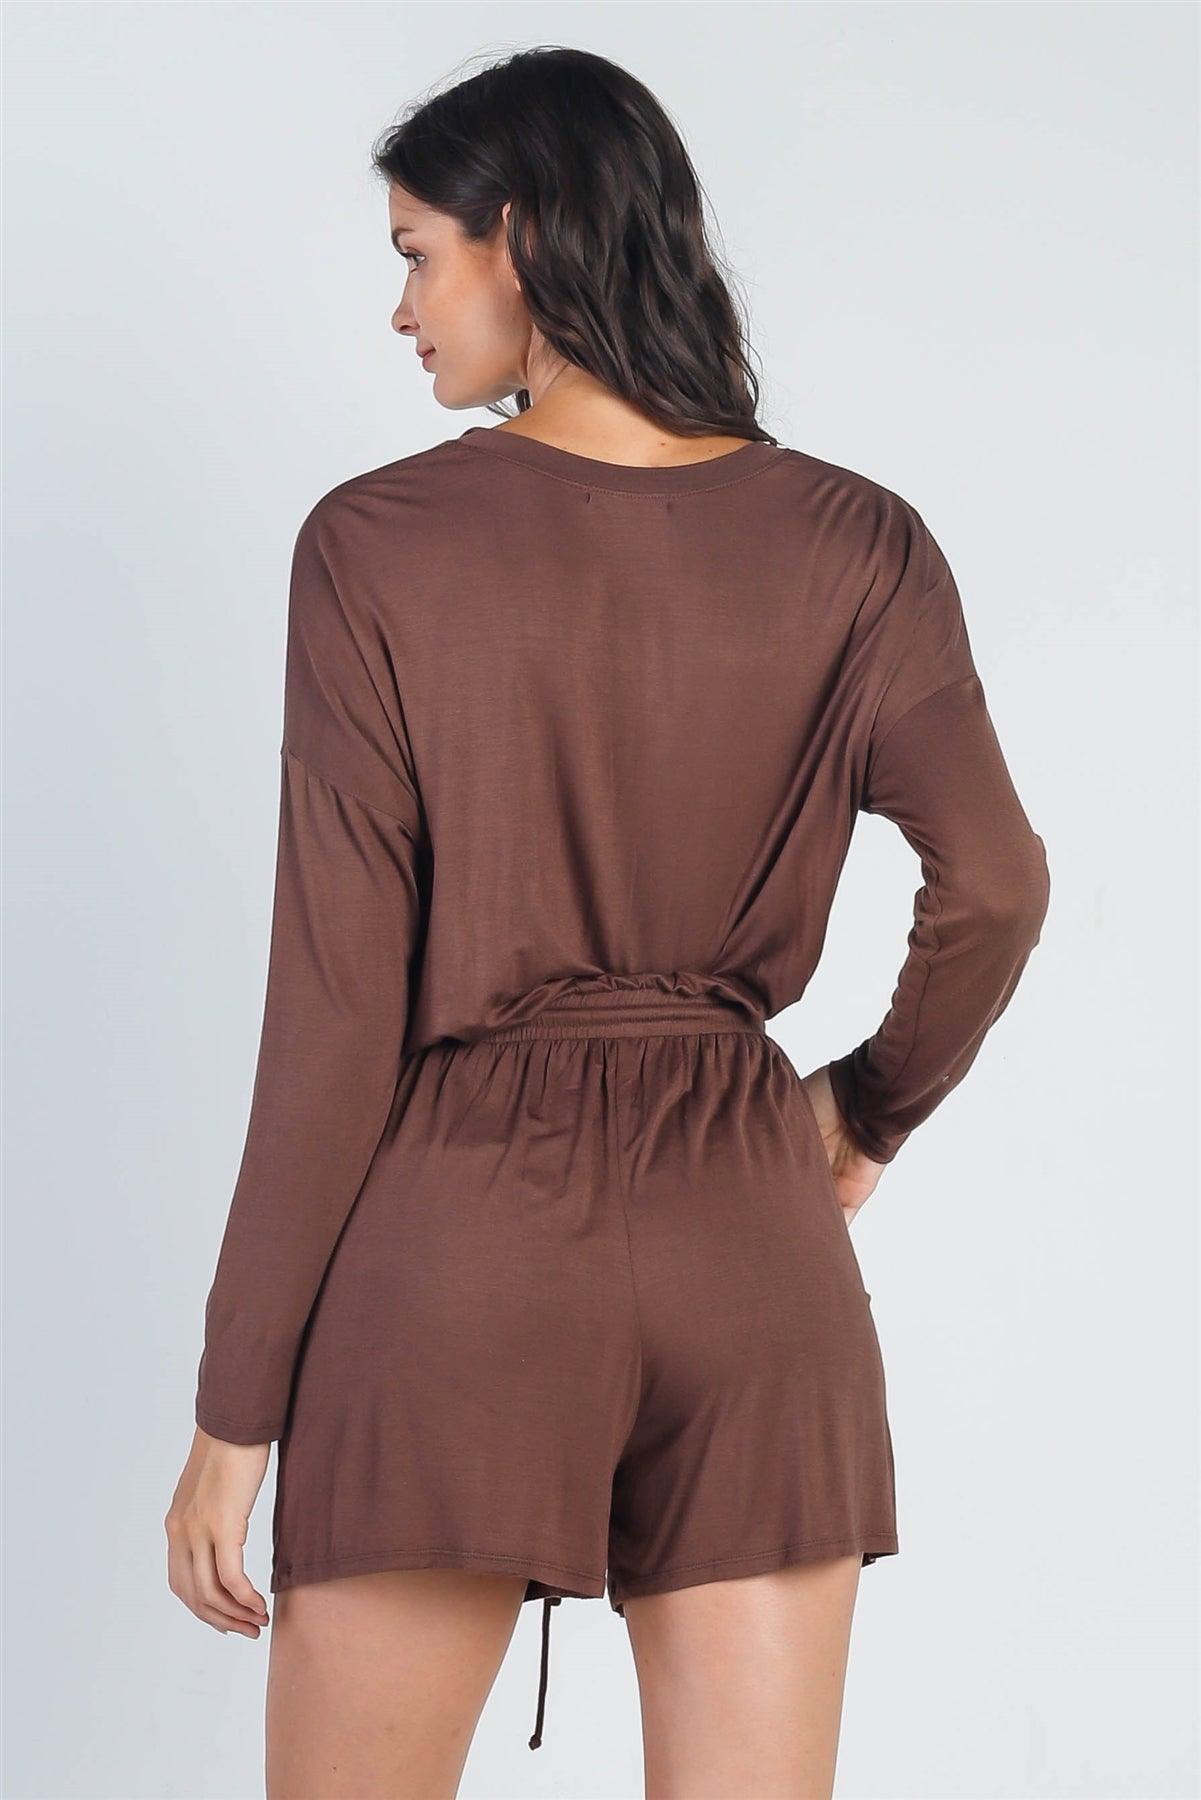 Tobacco Button Up Neck Detail Long Sleeve Romper /1-1-1